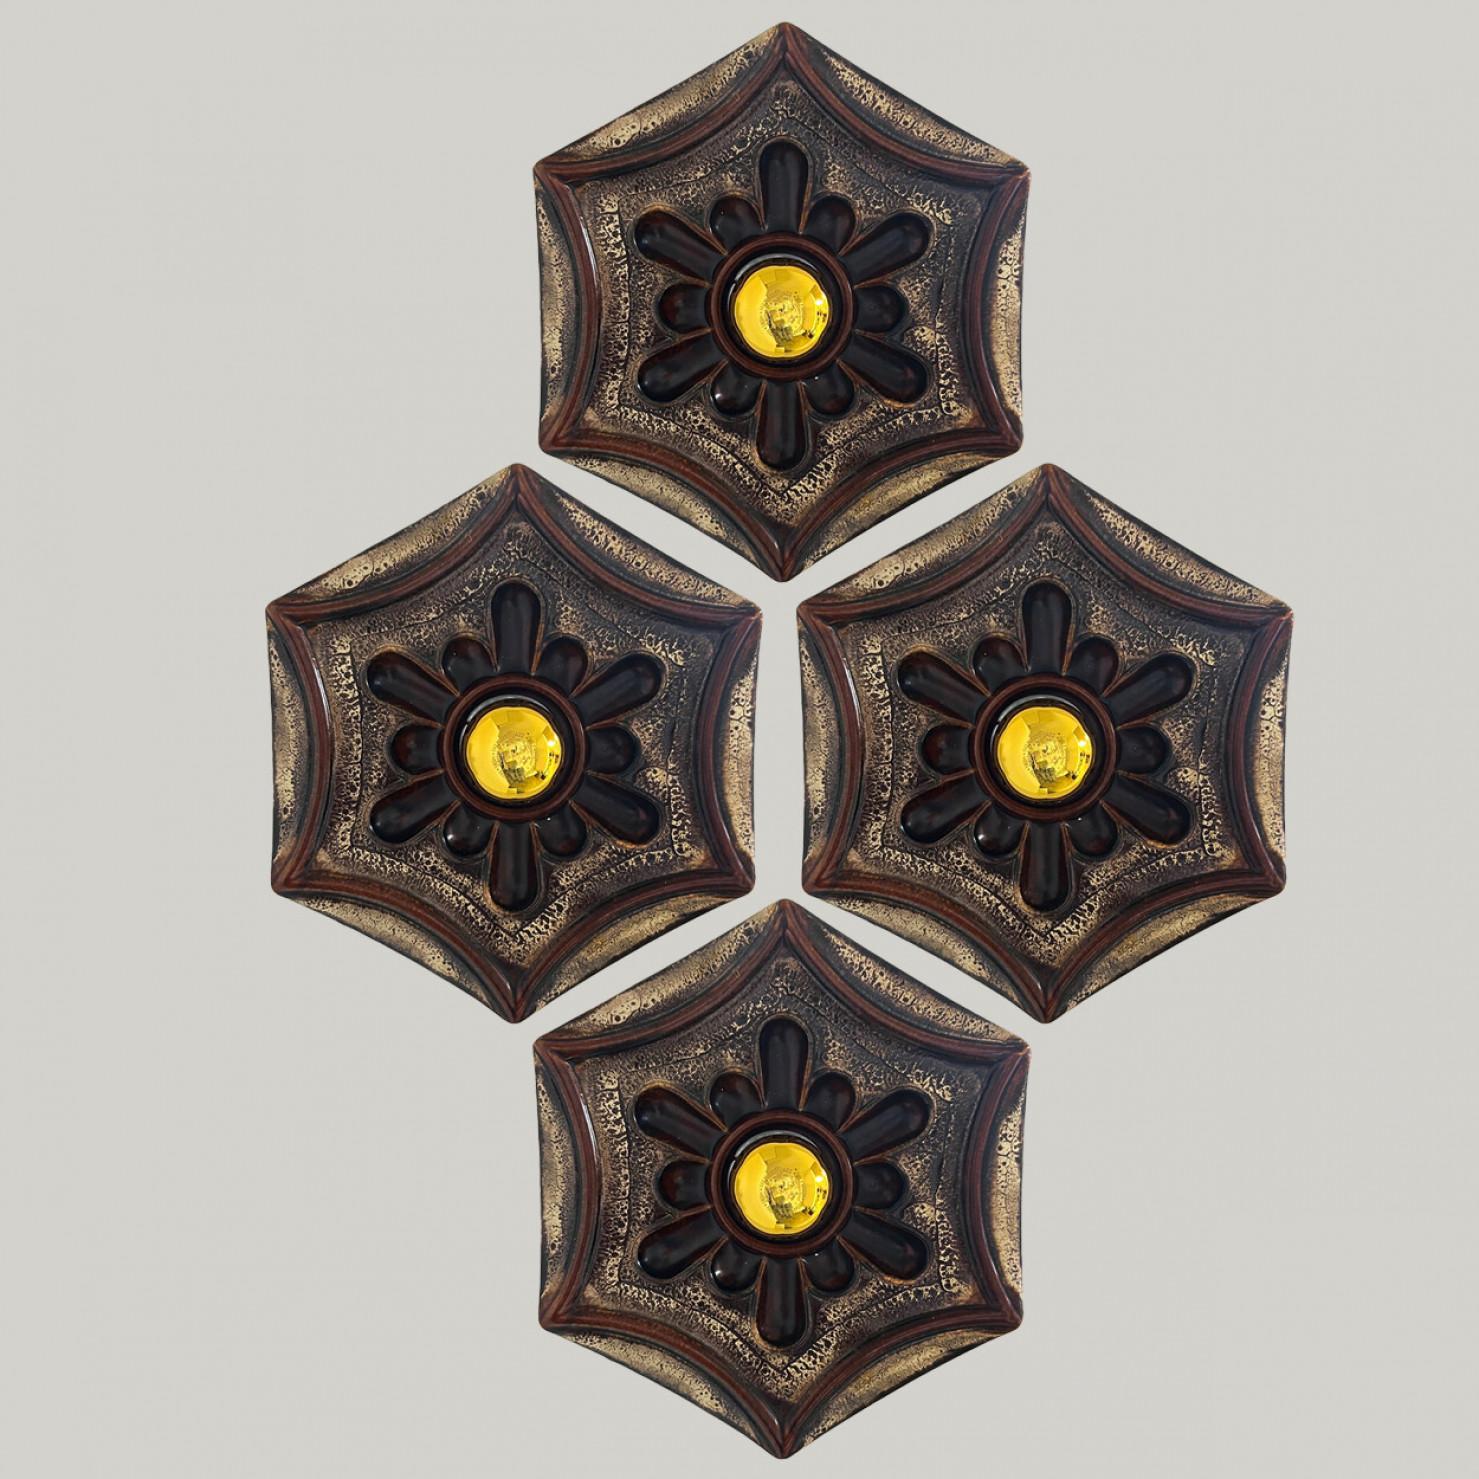 Brown hex- and star-shaped ceramic wall lights in Fat Lava style. Manufactured in Germany in the 1970s. The base of the light is hexagonal and there is a beautiful ceramic flower on top of that.

The style of the glaze is called 'Fat Lava'. Which